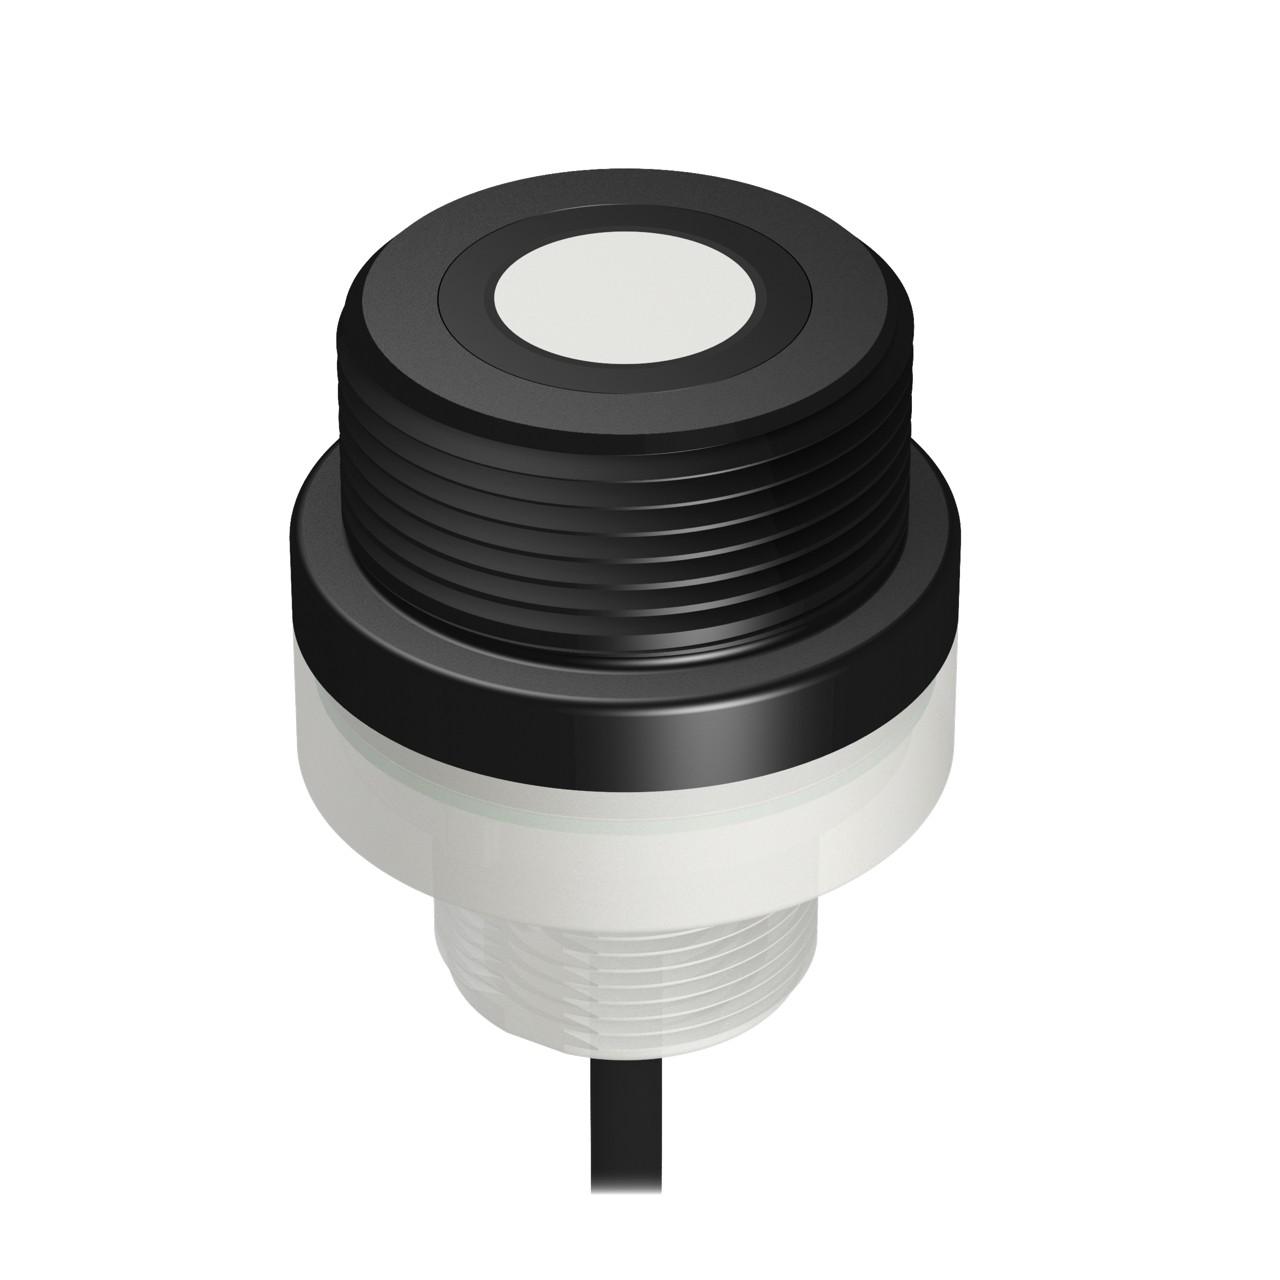 Banner K50UX1CRA K50 Ultrasonic Sensor, 1-Wire Serial Interface, Range: 300 mm to 3 m (11.8 in to 118 in, 230 mm (9 in) QD Cable